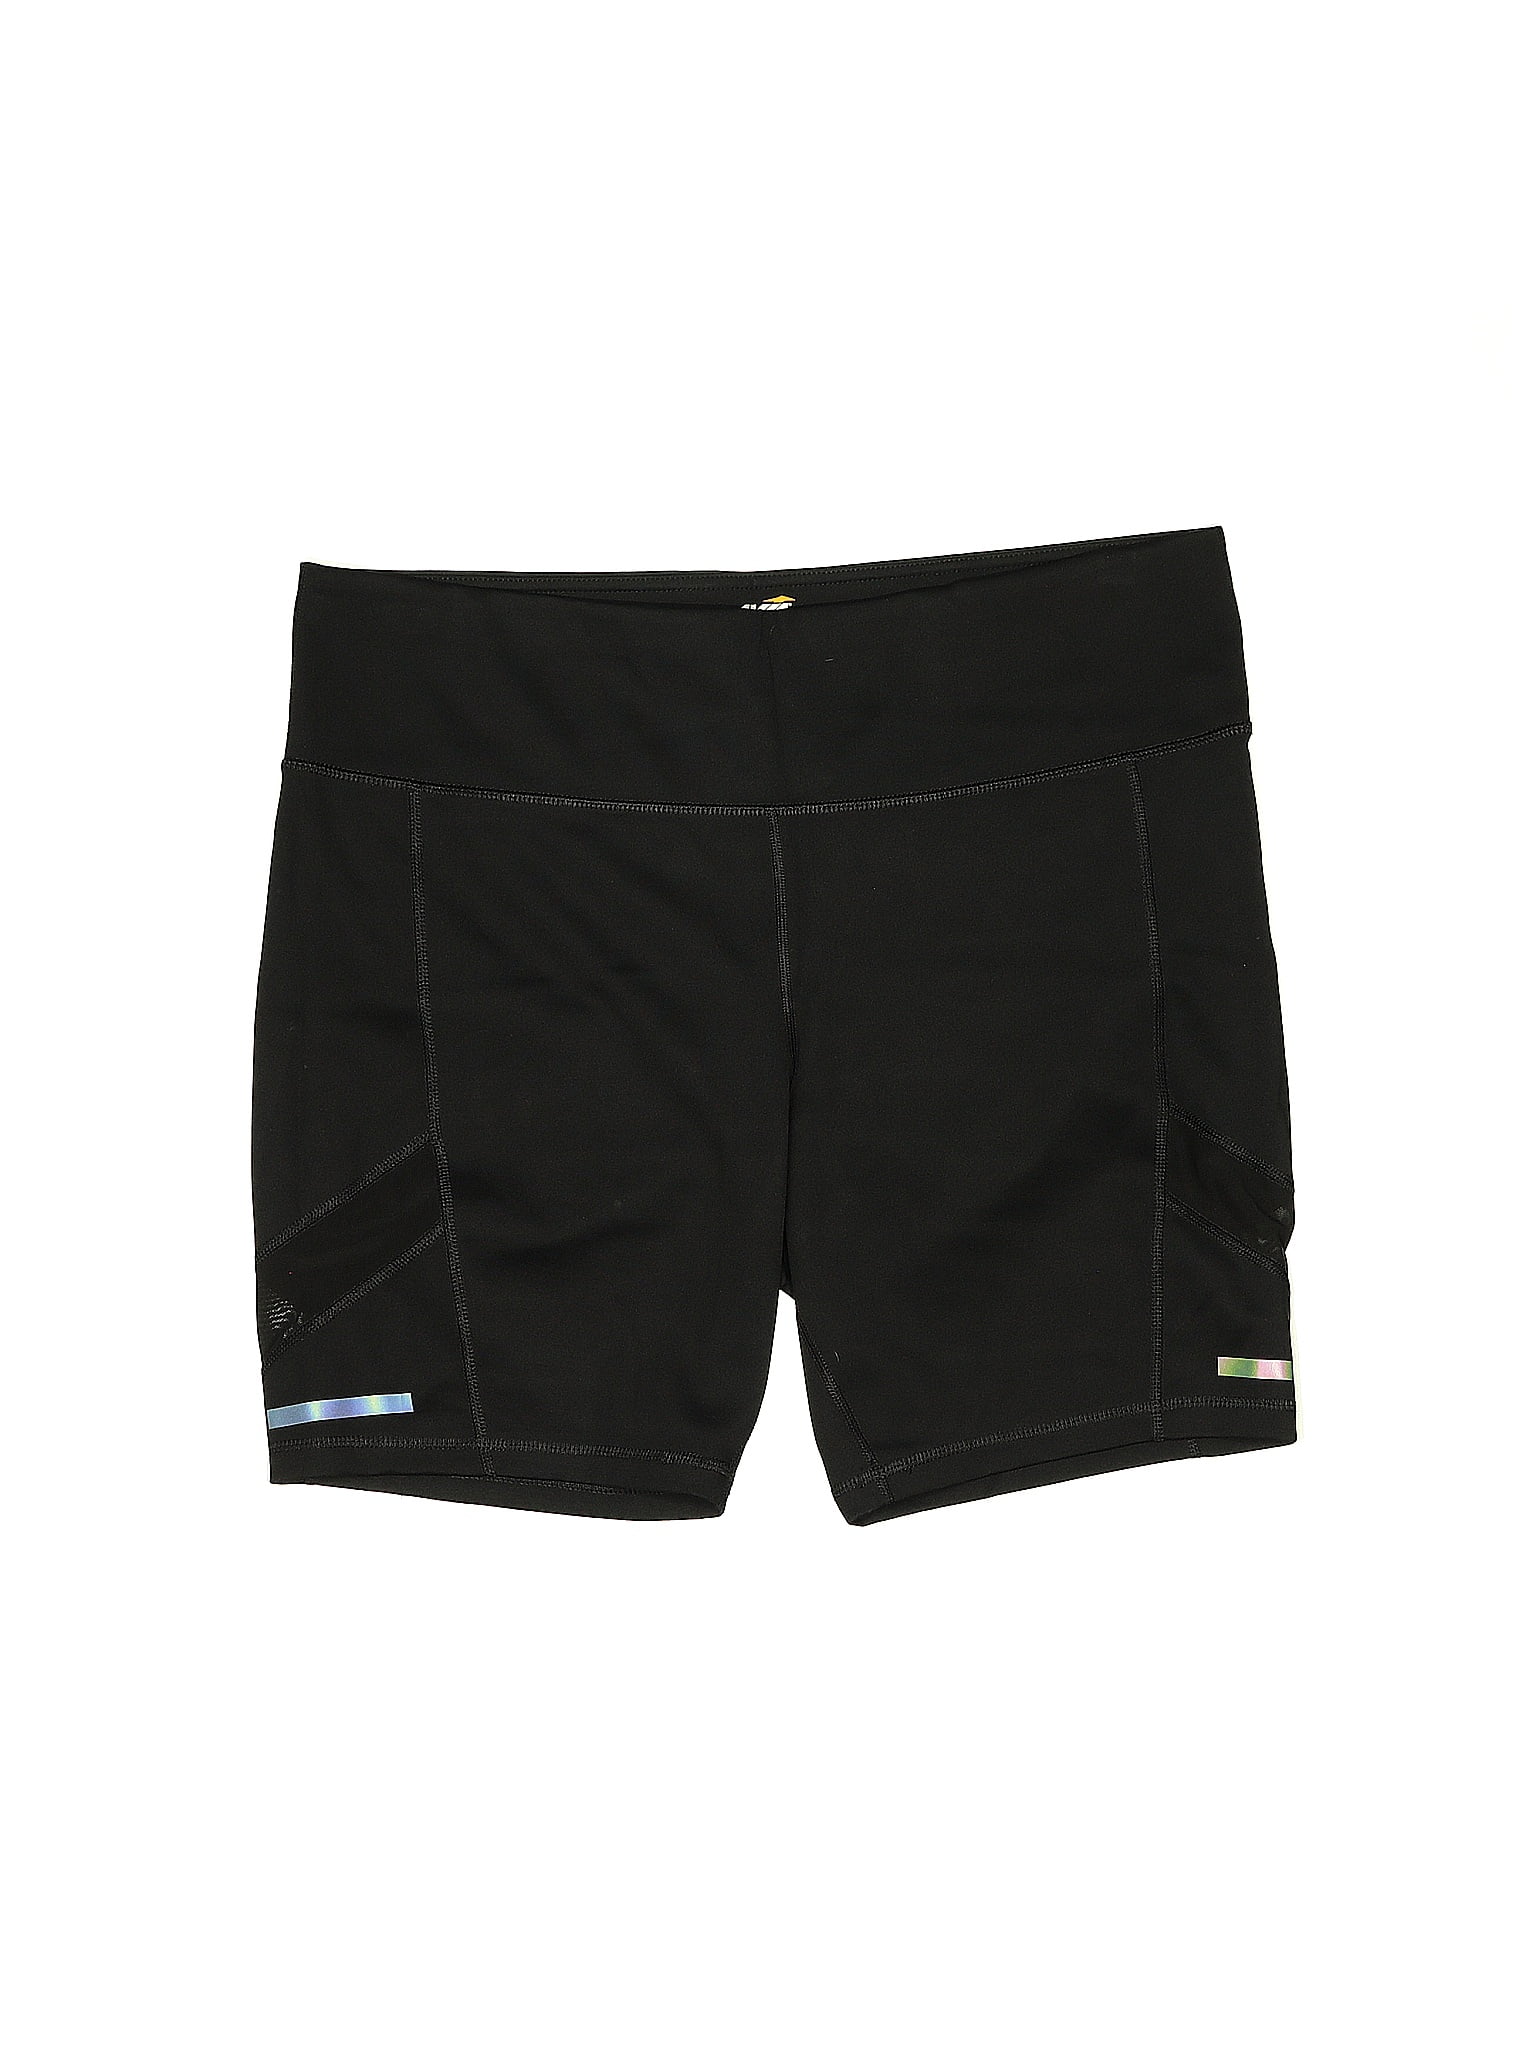 Avia Polyester Active Pants for Men